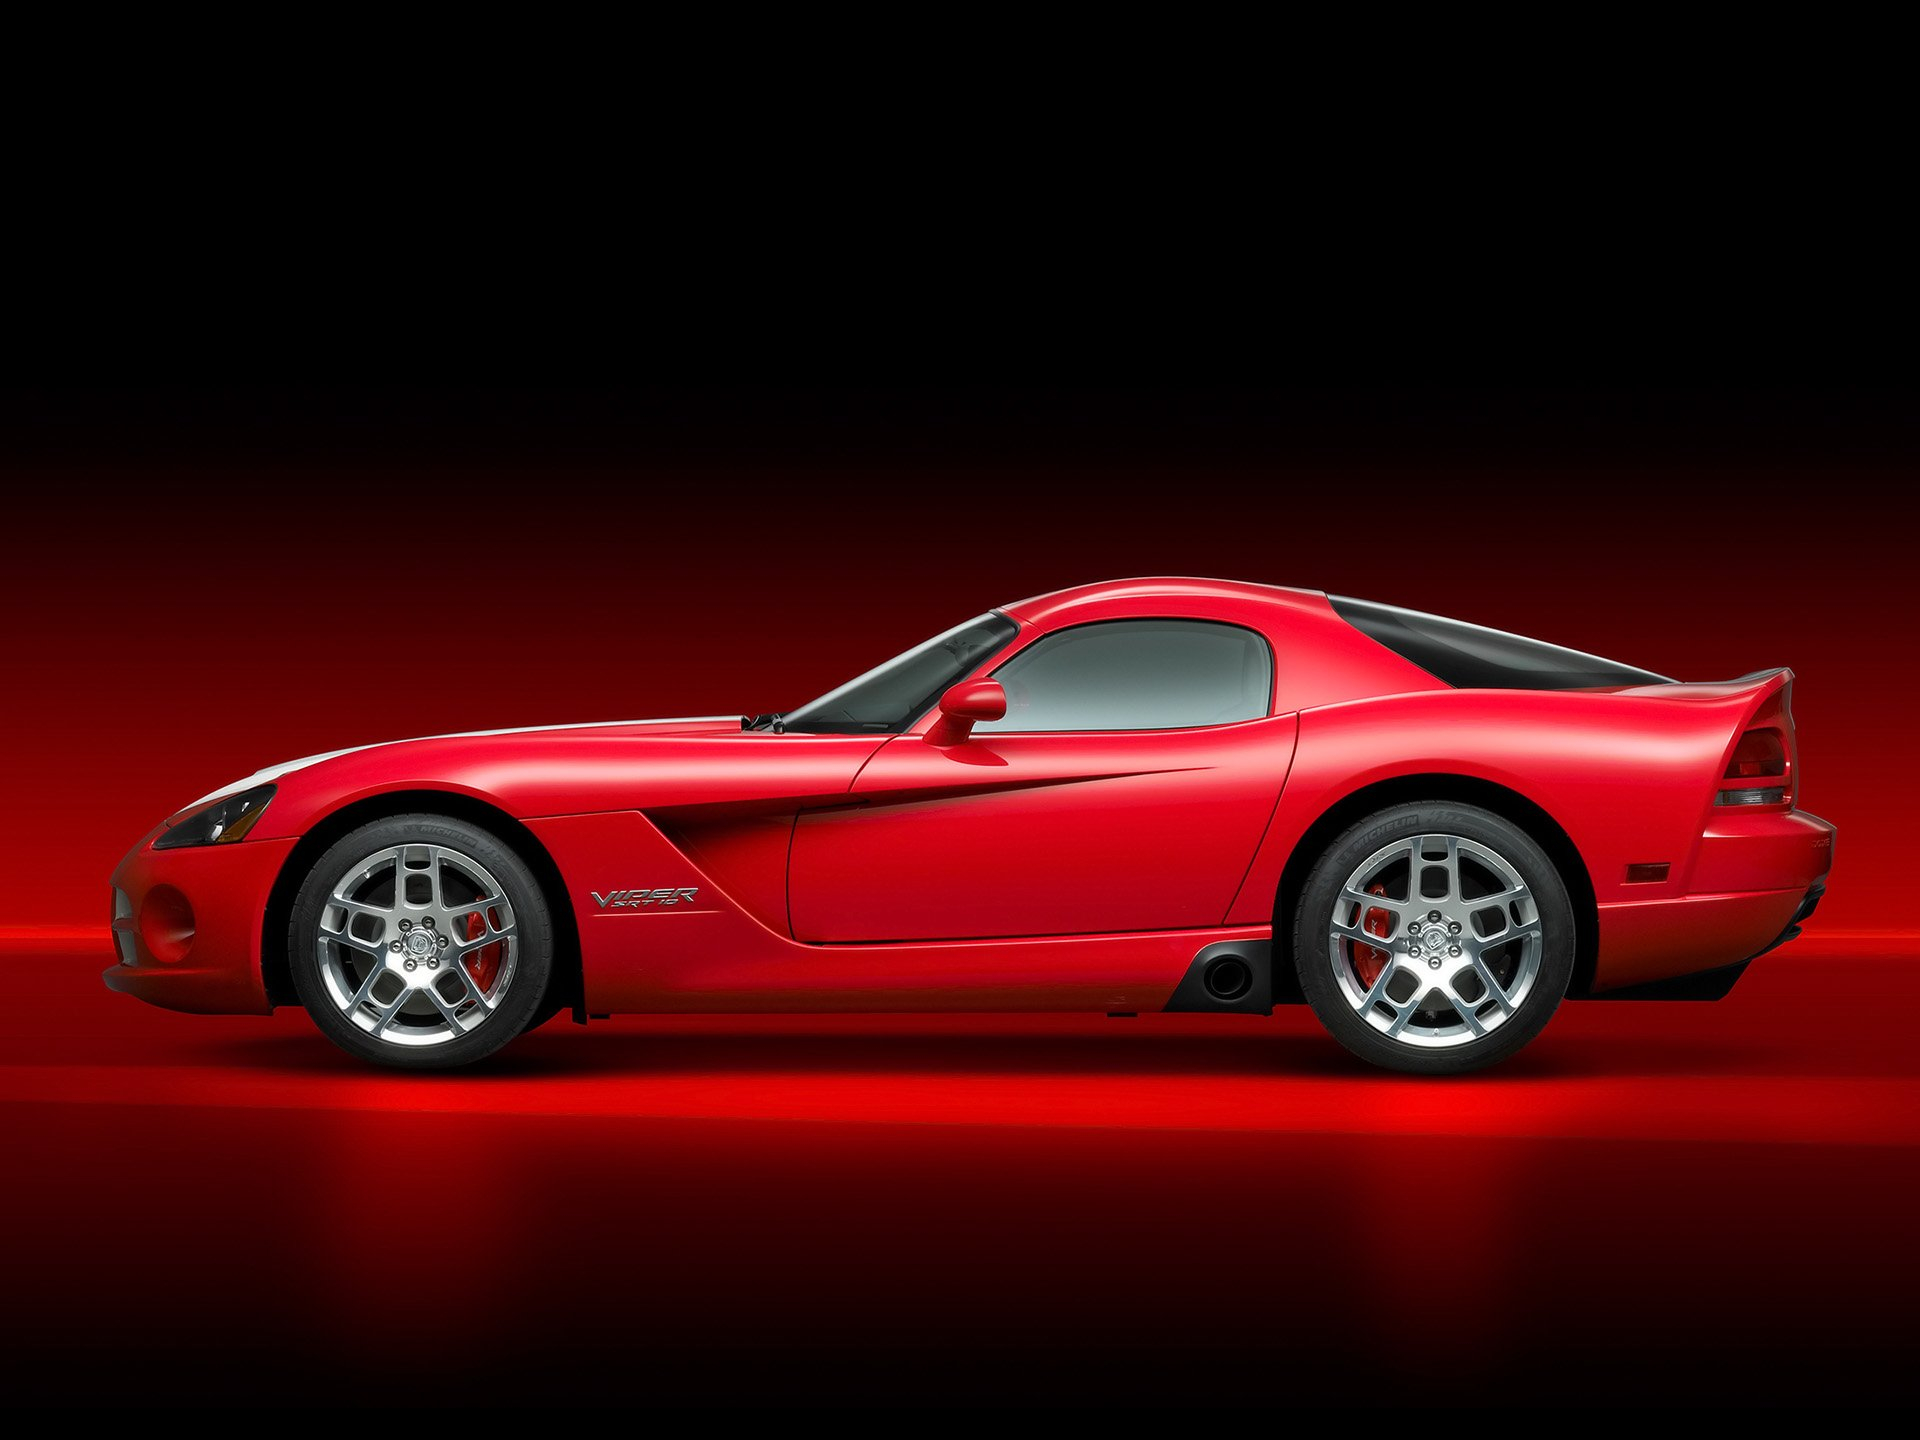 1920x1440 10+ Dodge Viper SRT-10 HD Wallpapers and Backgrounds